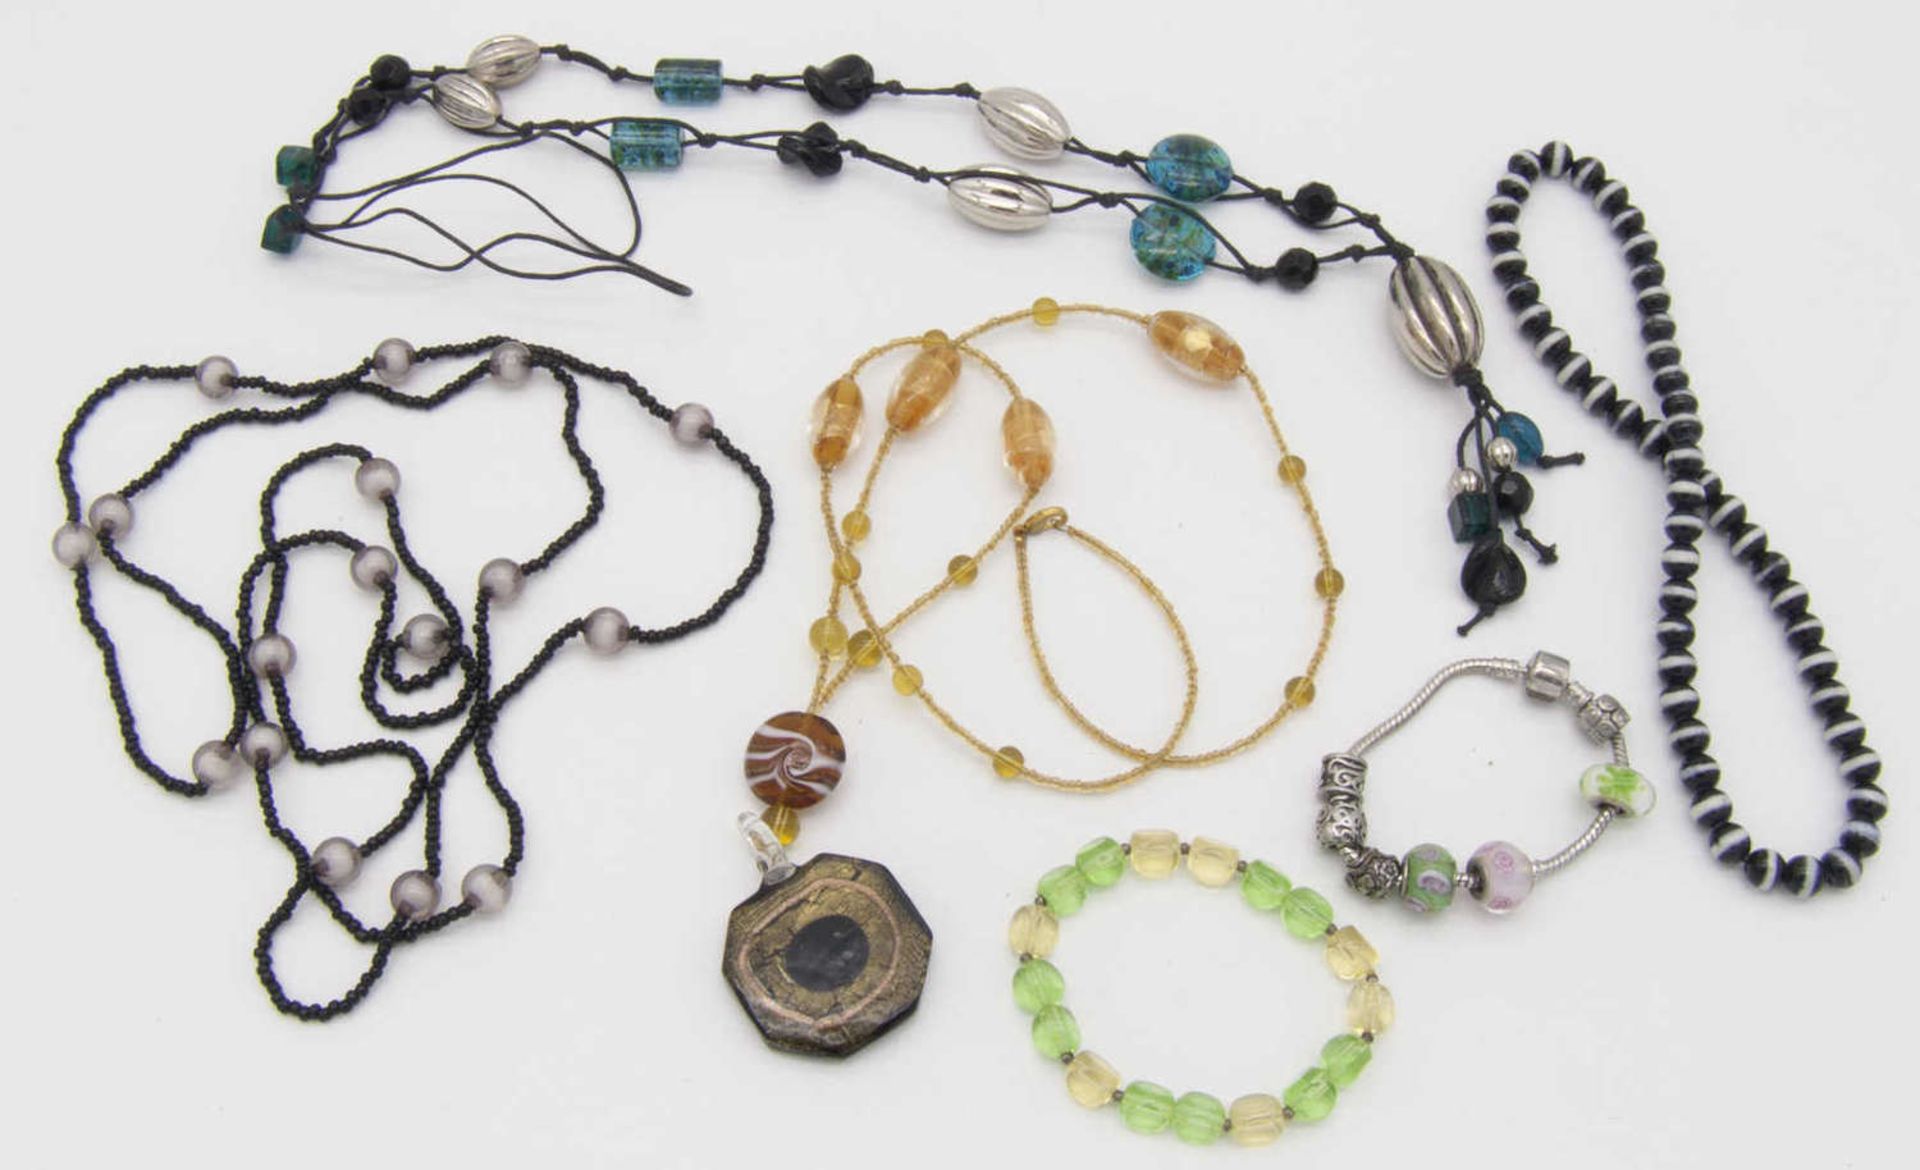 Lot Modeschmuck. Dabei Ketten und Armbänder. Lot of fashion jewelery. With chains and bracelets.